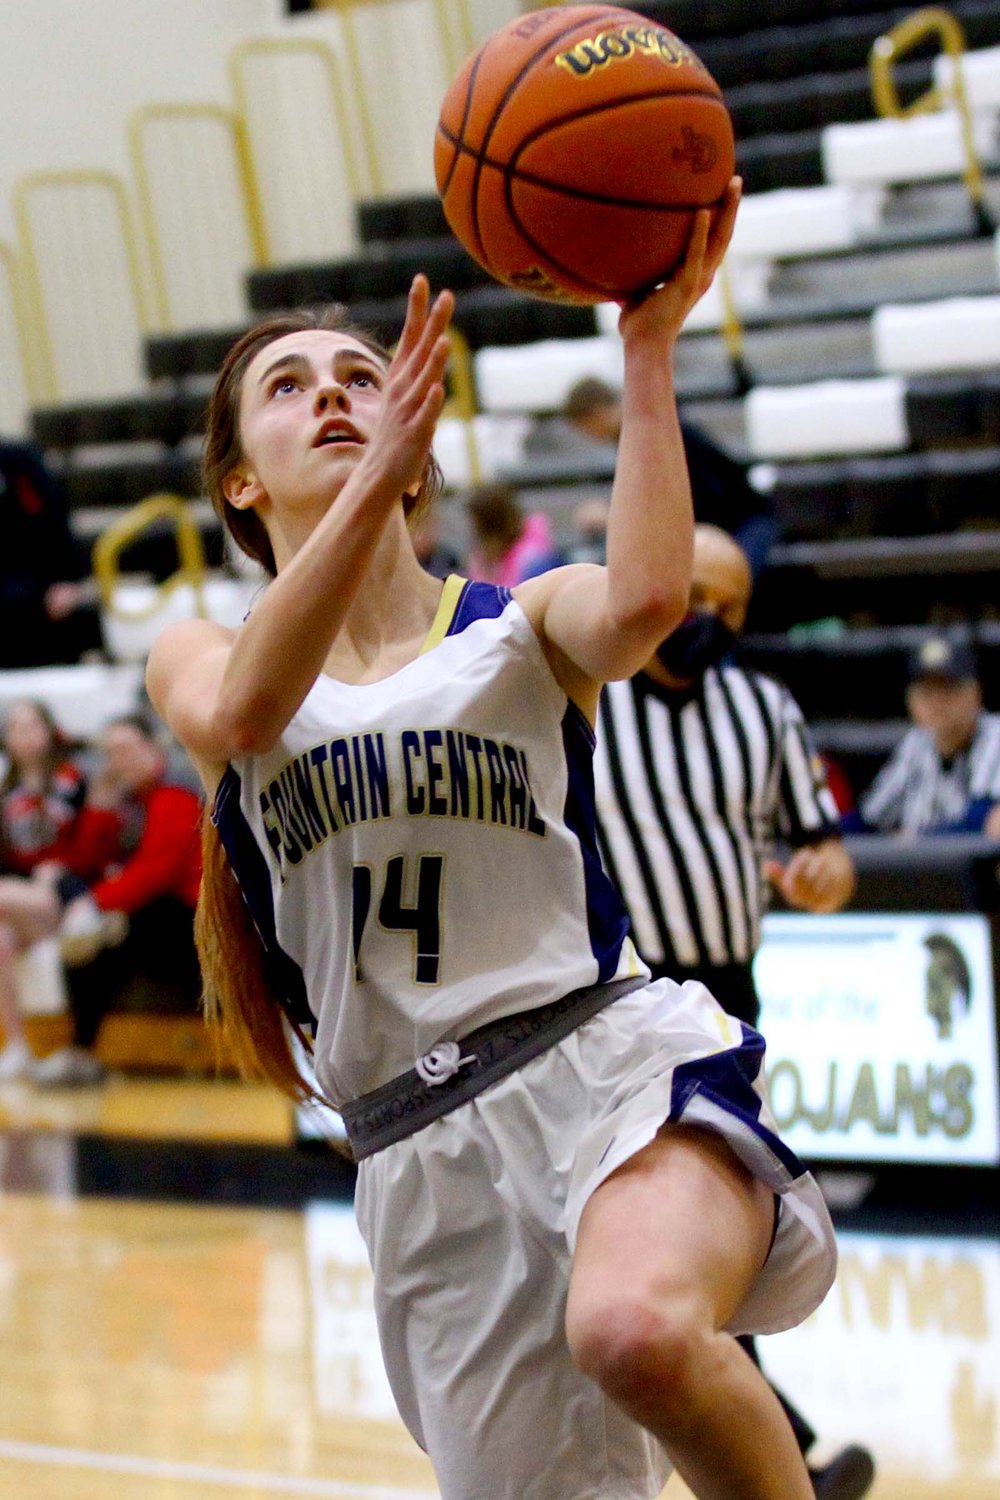 Jerzi Hershberger of Fountain Central shoots a lay-up.